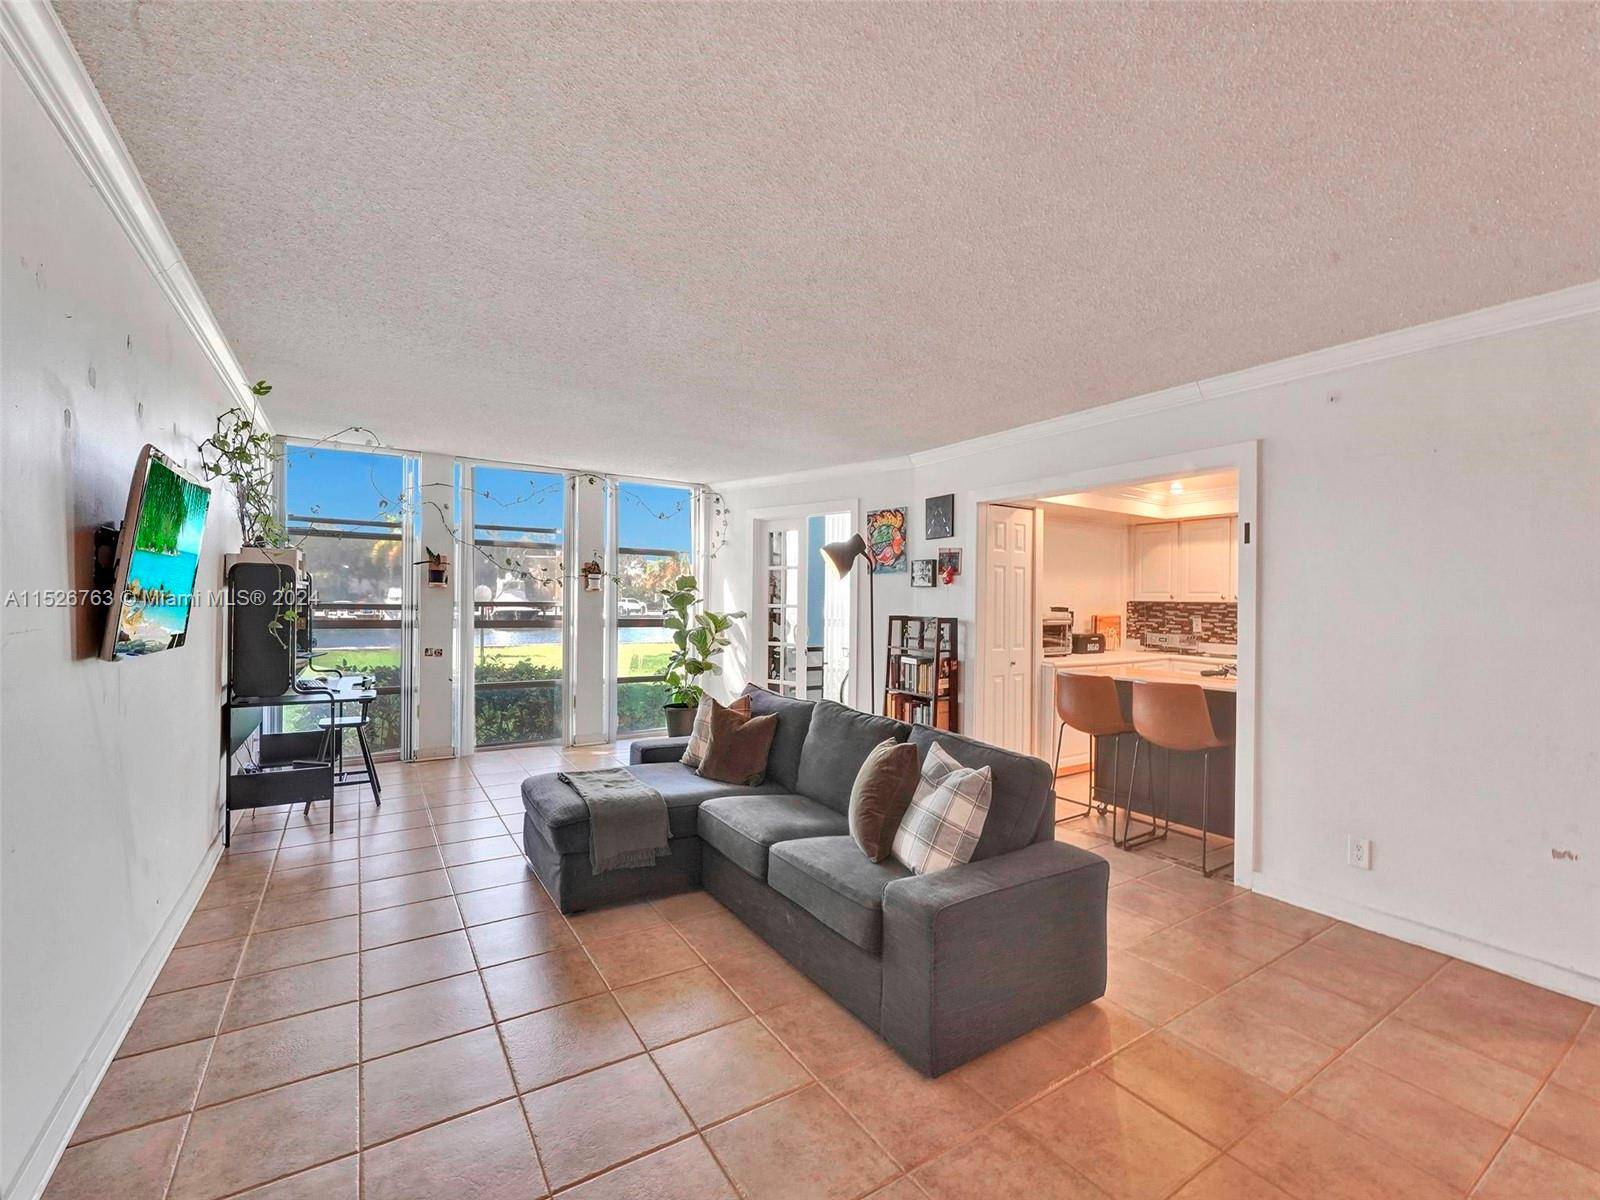 Experience waterfront living in this 3 bedroom, 2 bathroom apartment boasting panoramic bay views.